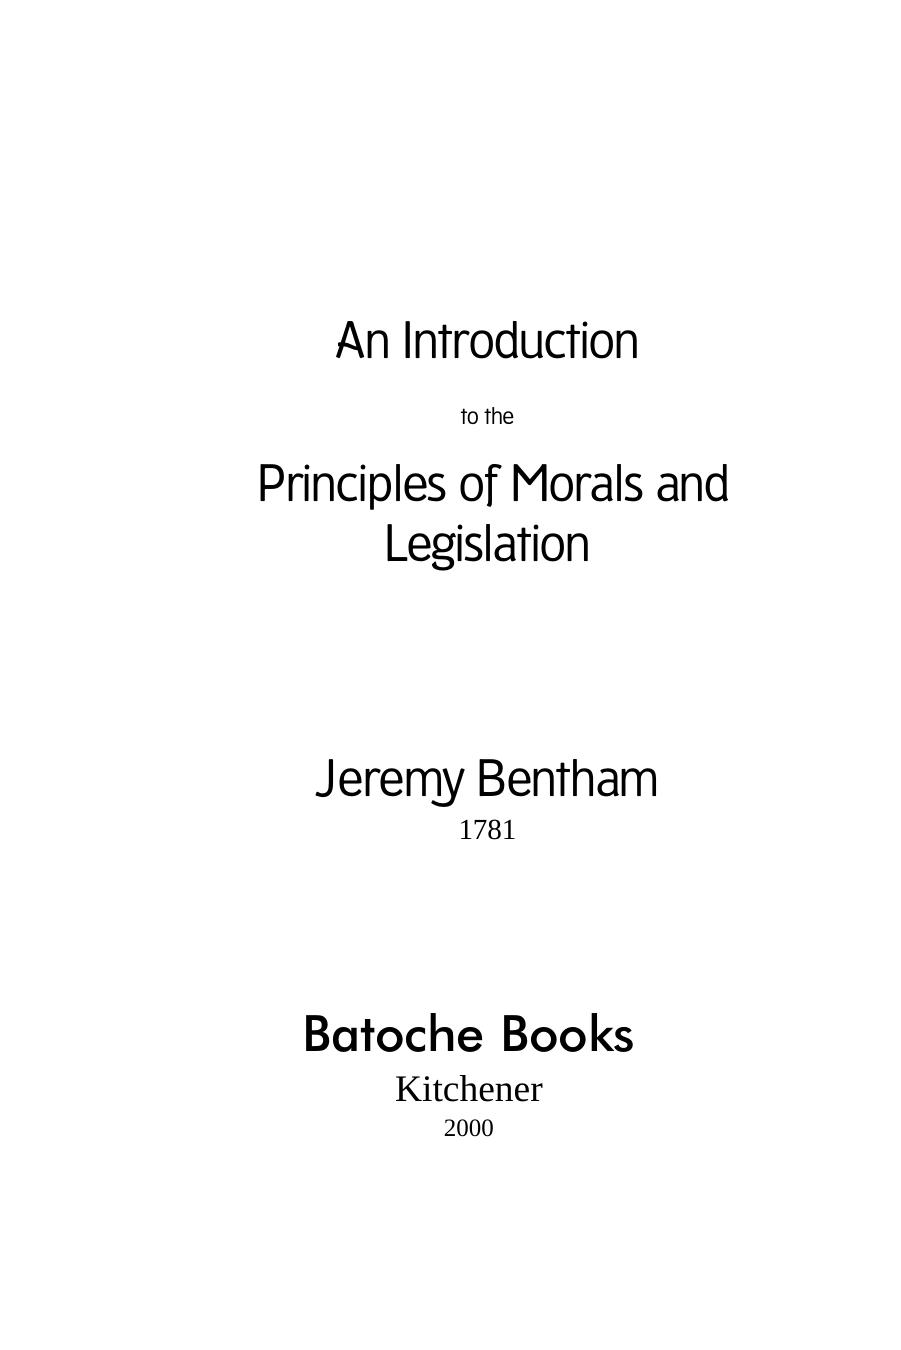 An Introduction to the Principles of Morals and Legislation by Jeremy Bentham